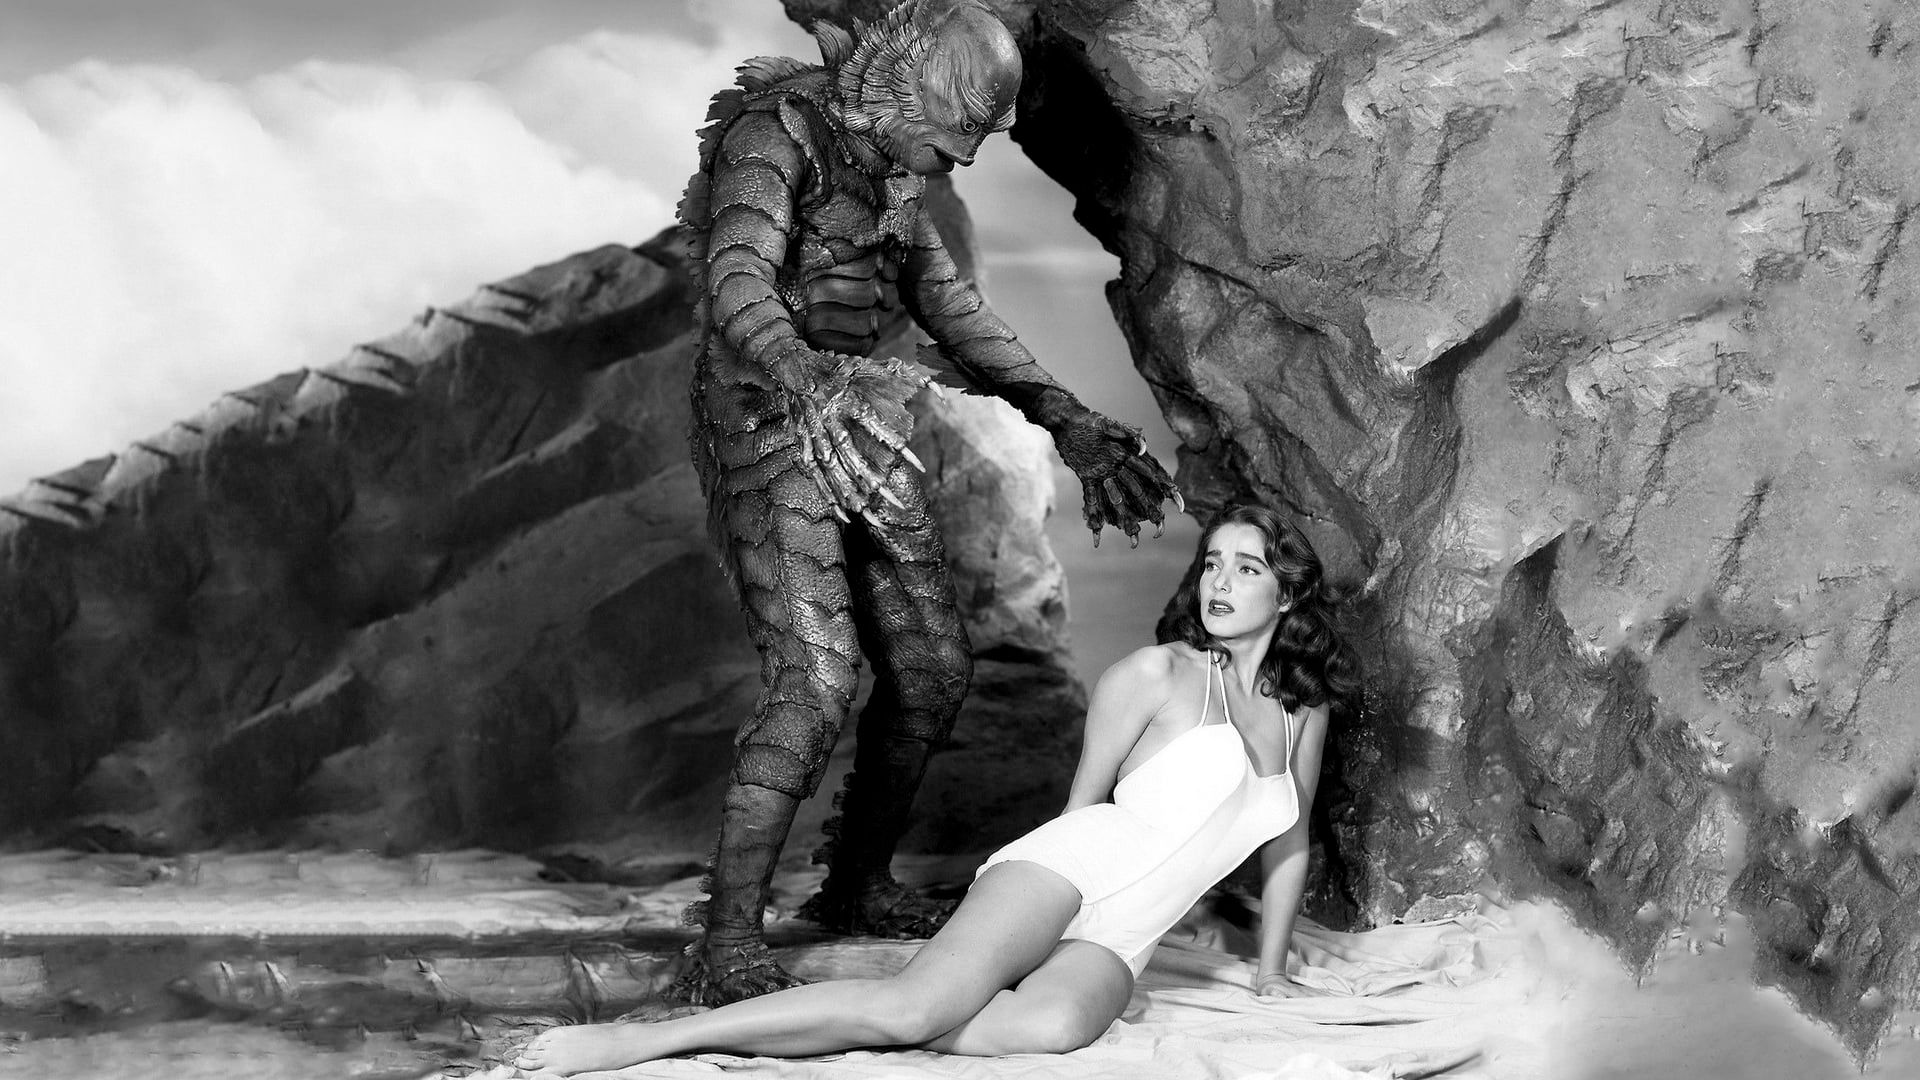 Creature from the Black Lagoon background